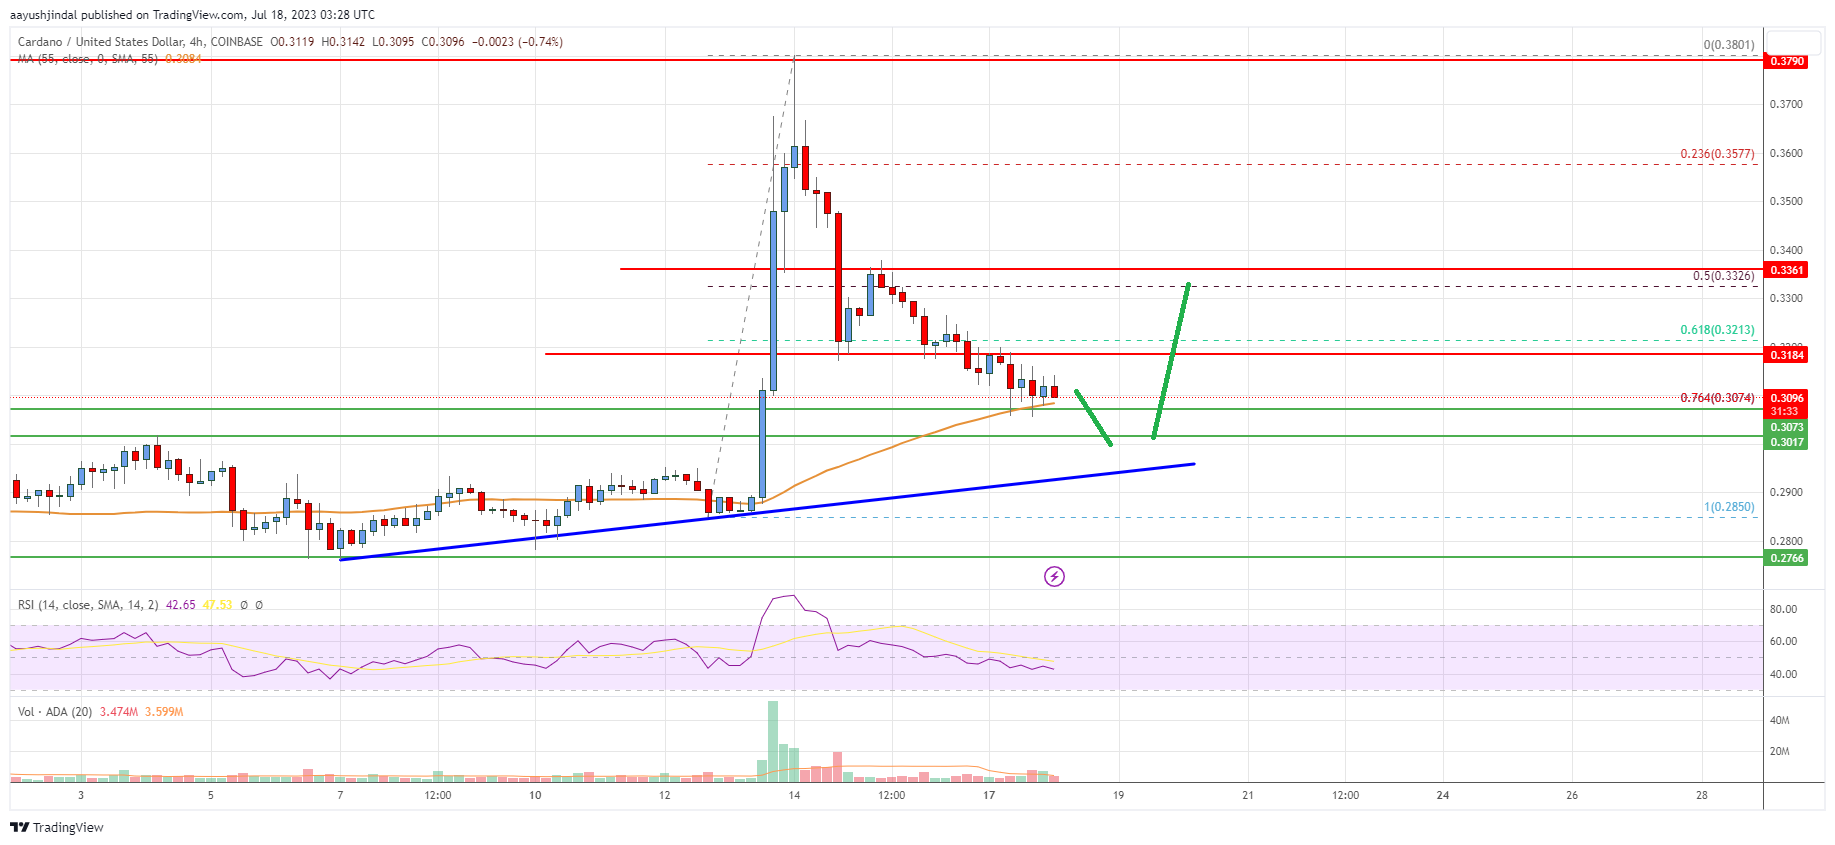 Cardano (ADA) Price Analysis: Key Uptrend Support Nearby At $0.30